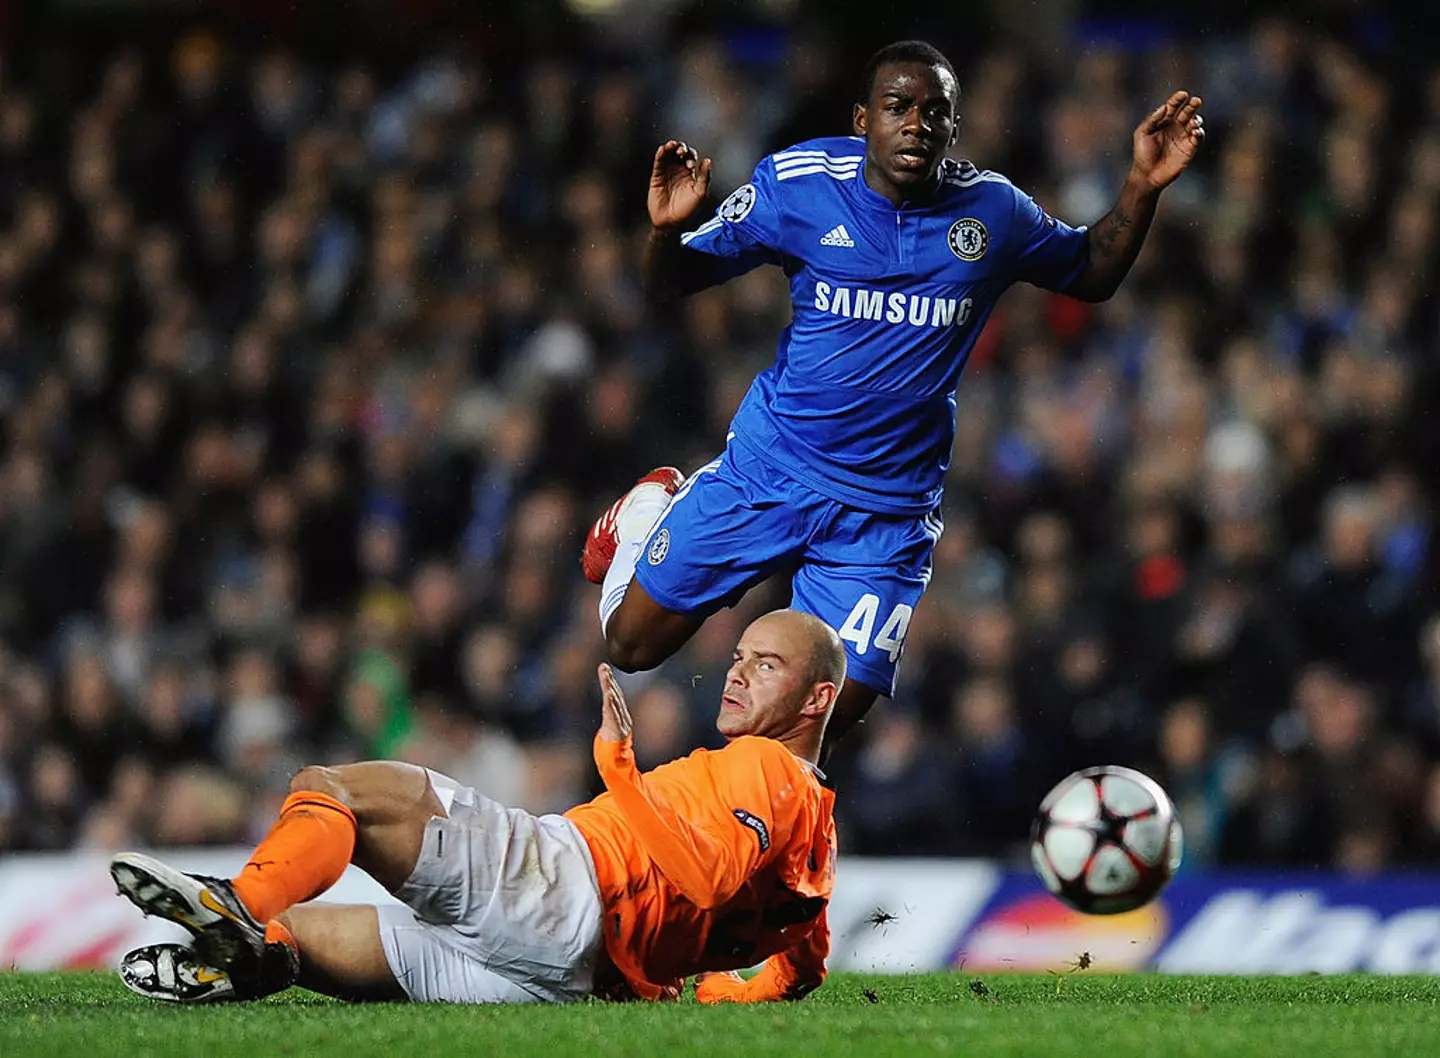 Gael Kakuta playing for Chelsea in a Champions League match against APOEL (